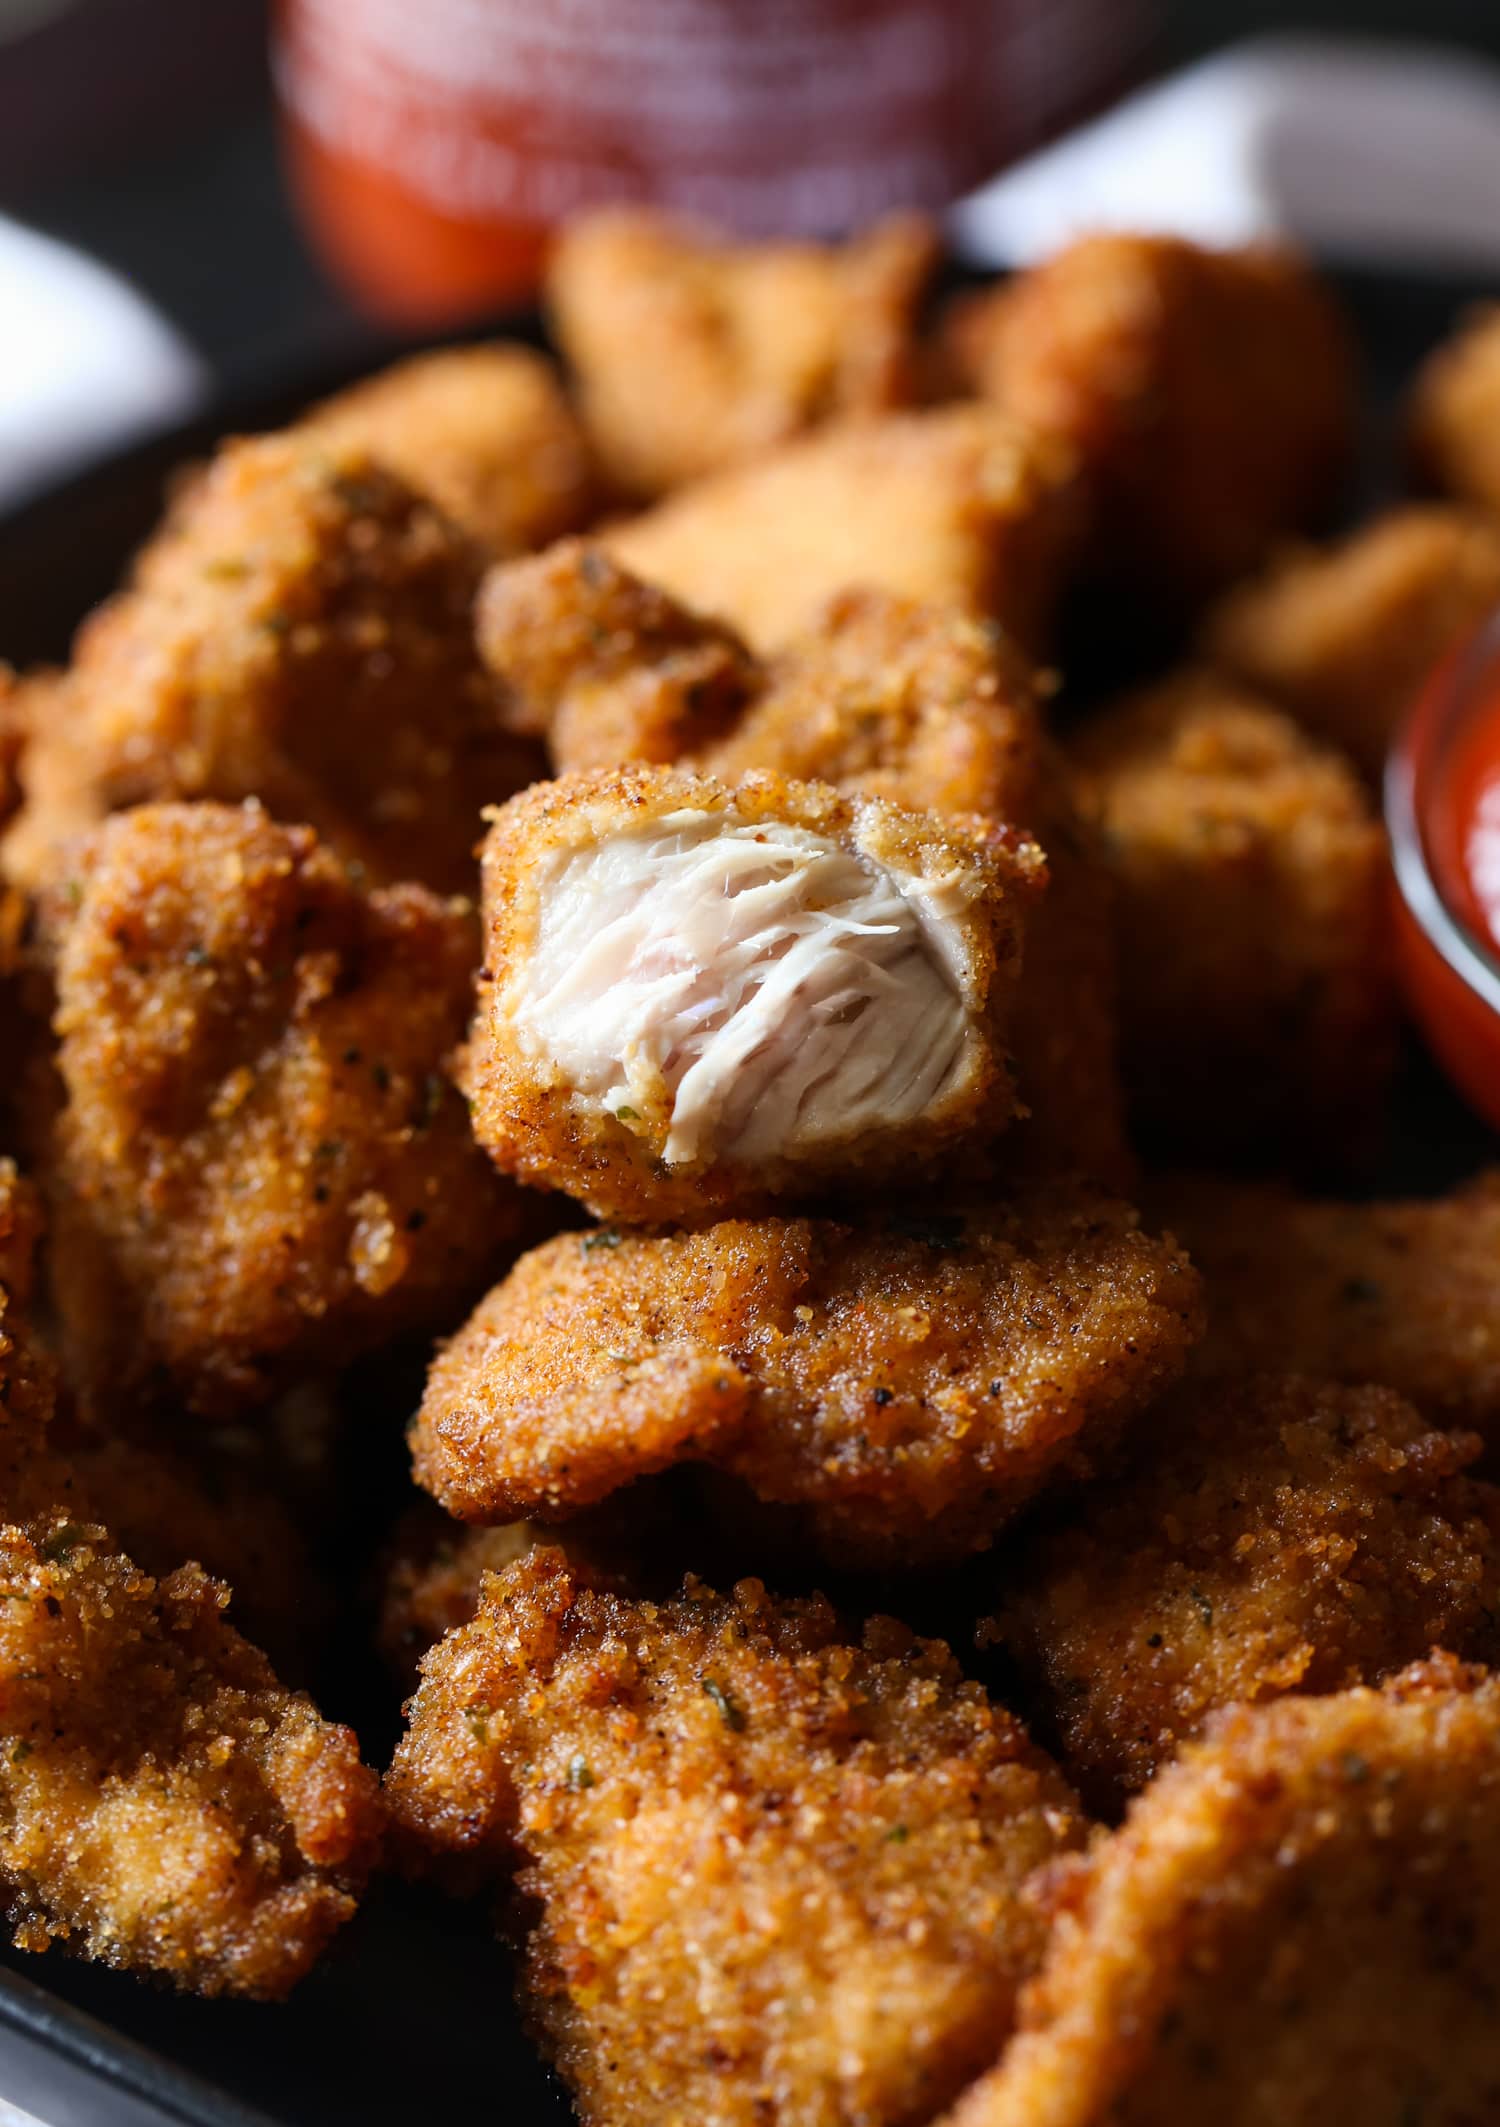 A plate full of homemade spicy nuggets, with one chicken nugget cut open to reveal tender and juicy insides.